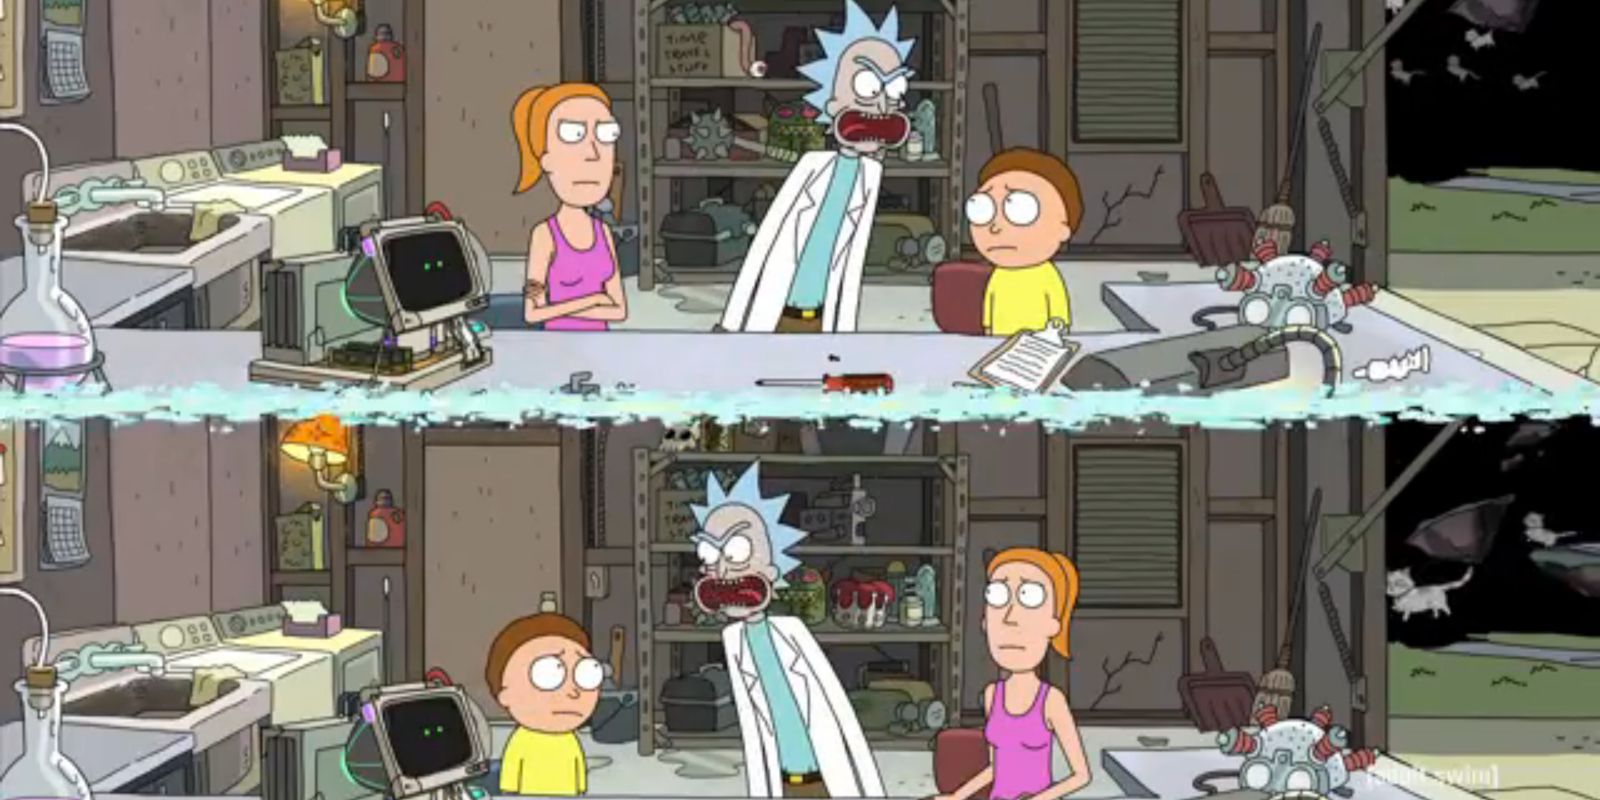 rick and morty season 2 episode 1 online free